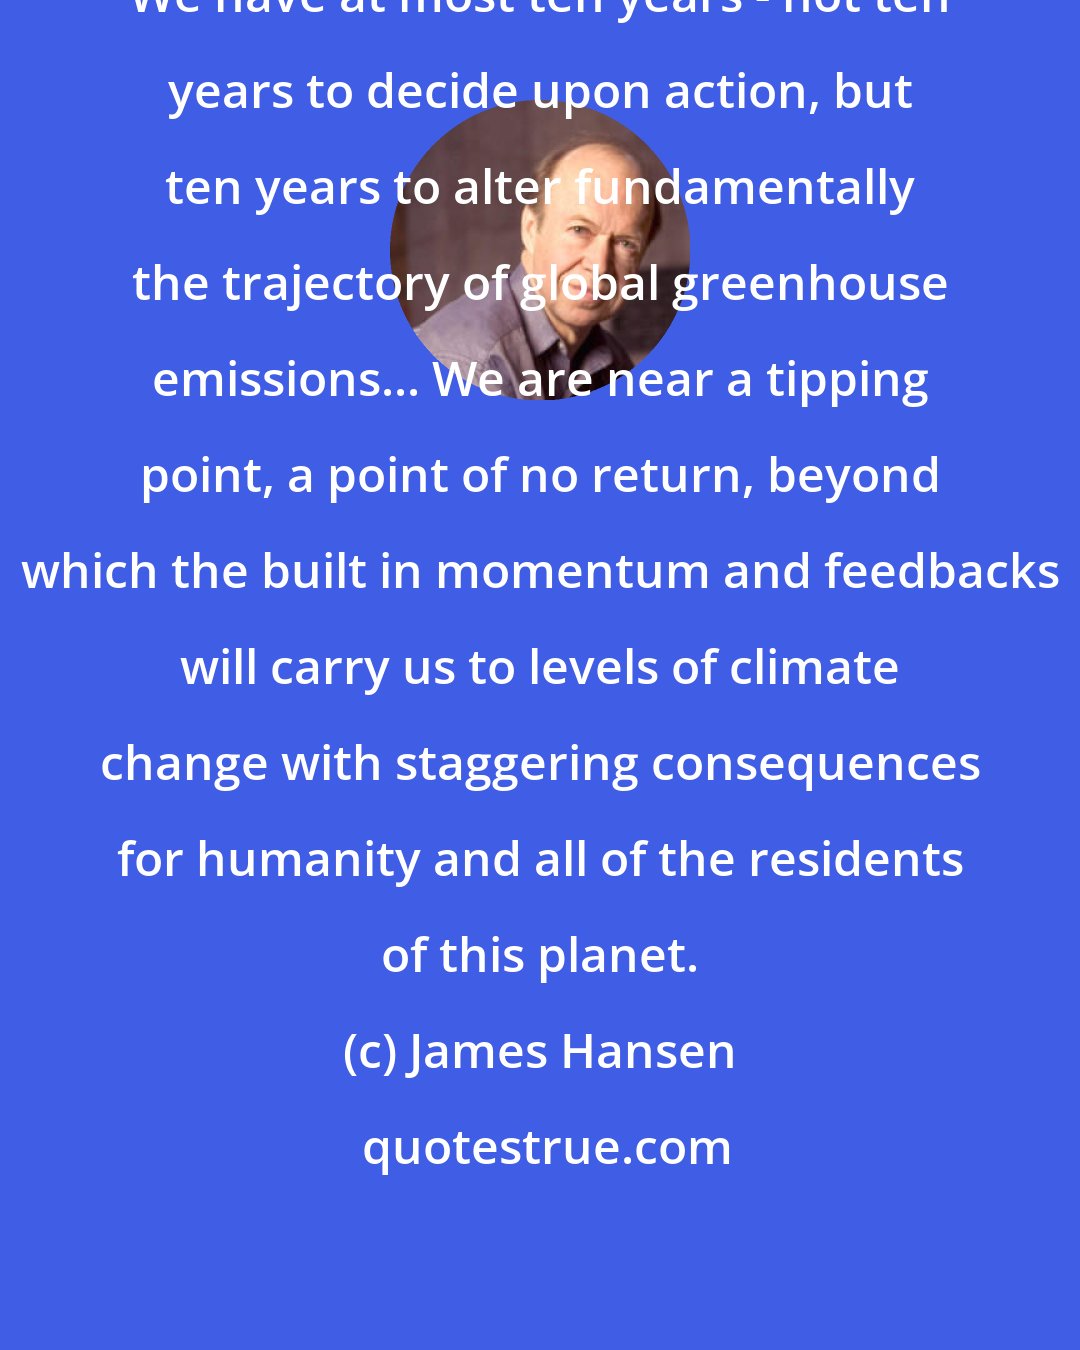 James Hansen: We have at most ten years - not ten years to decide upon action, but ten years to alter fundamentally the trajectory of global greenhouse emissions... We are near a tipping point, a point of no return, beyond which the built in momentum and feedbacks will carry us to levels of climate change with staggering consequences for humanity and all of the residents of this planet.